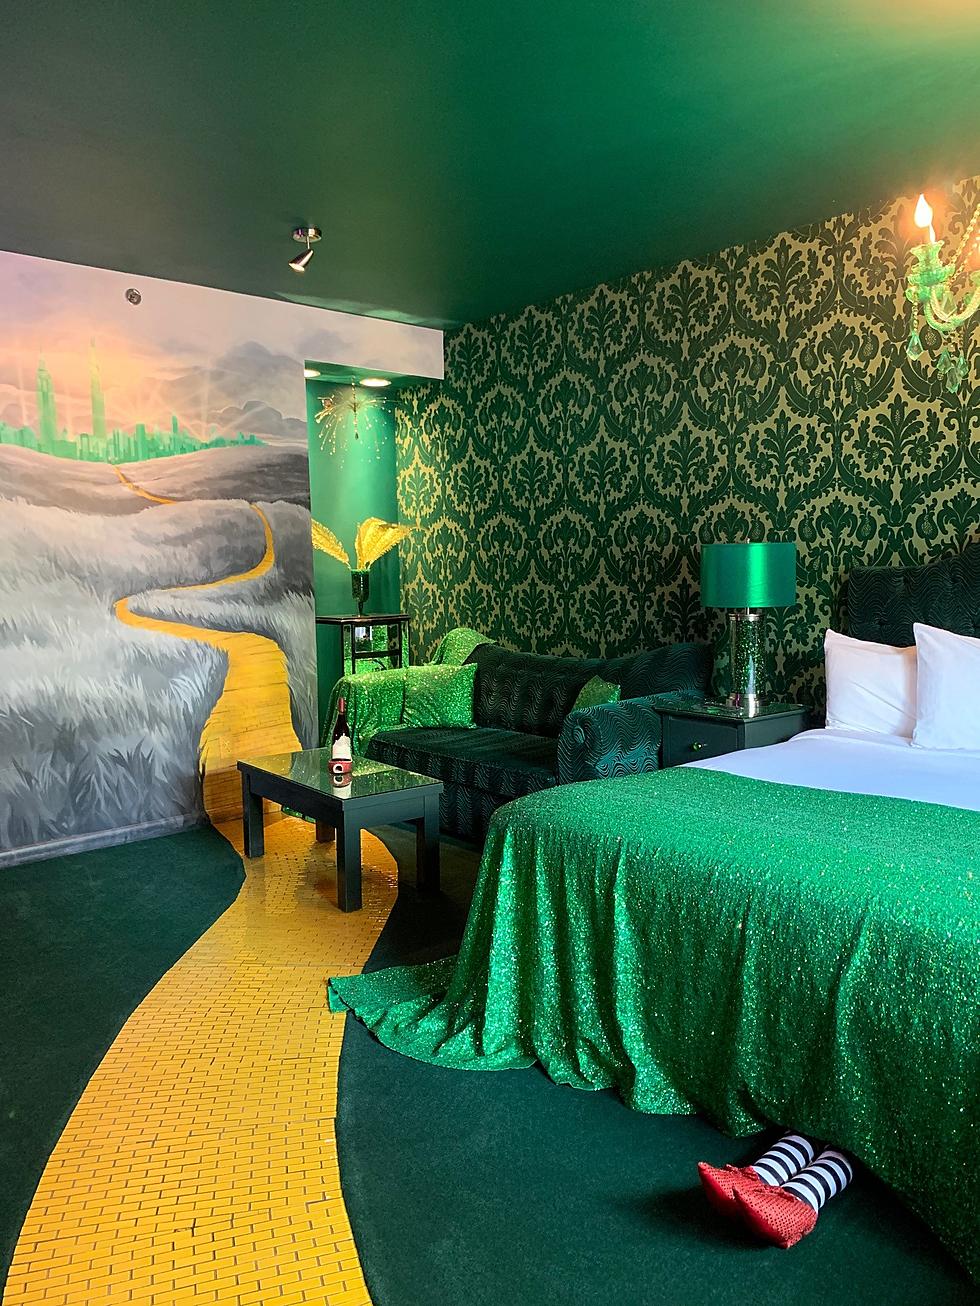 Escape Reality at These “Maximalists” Fantasy Suites